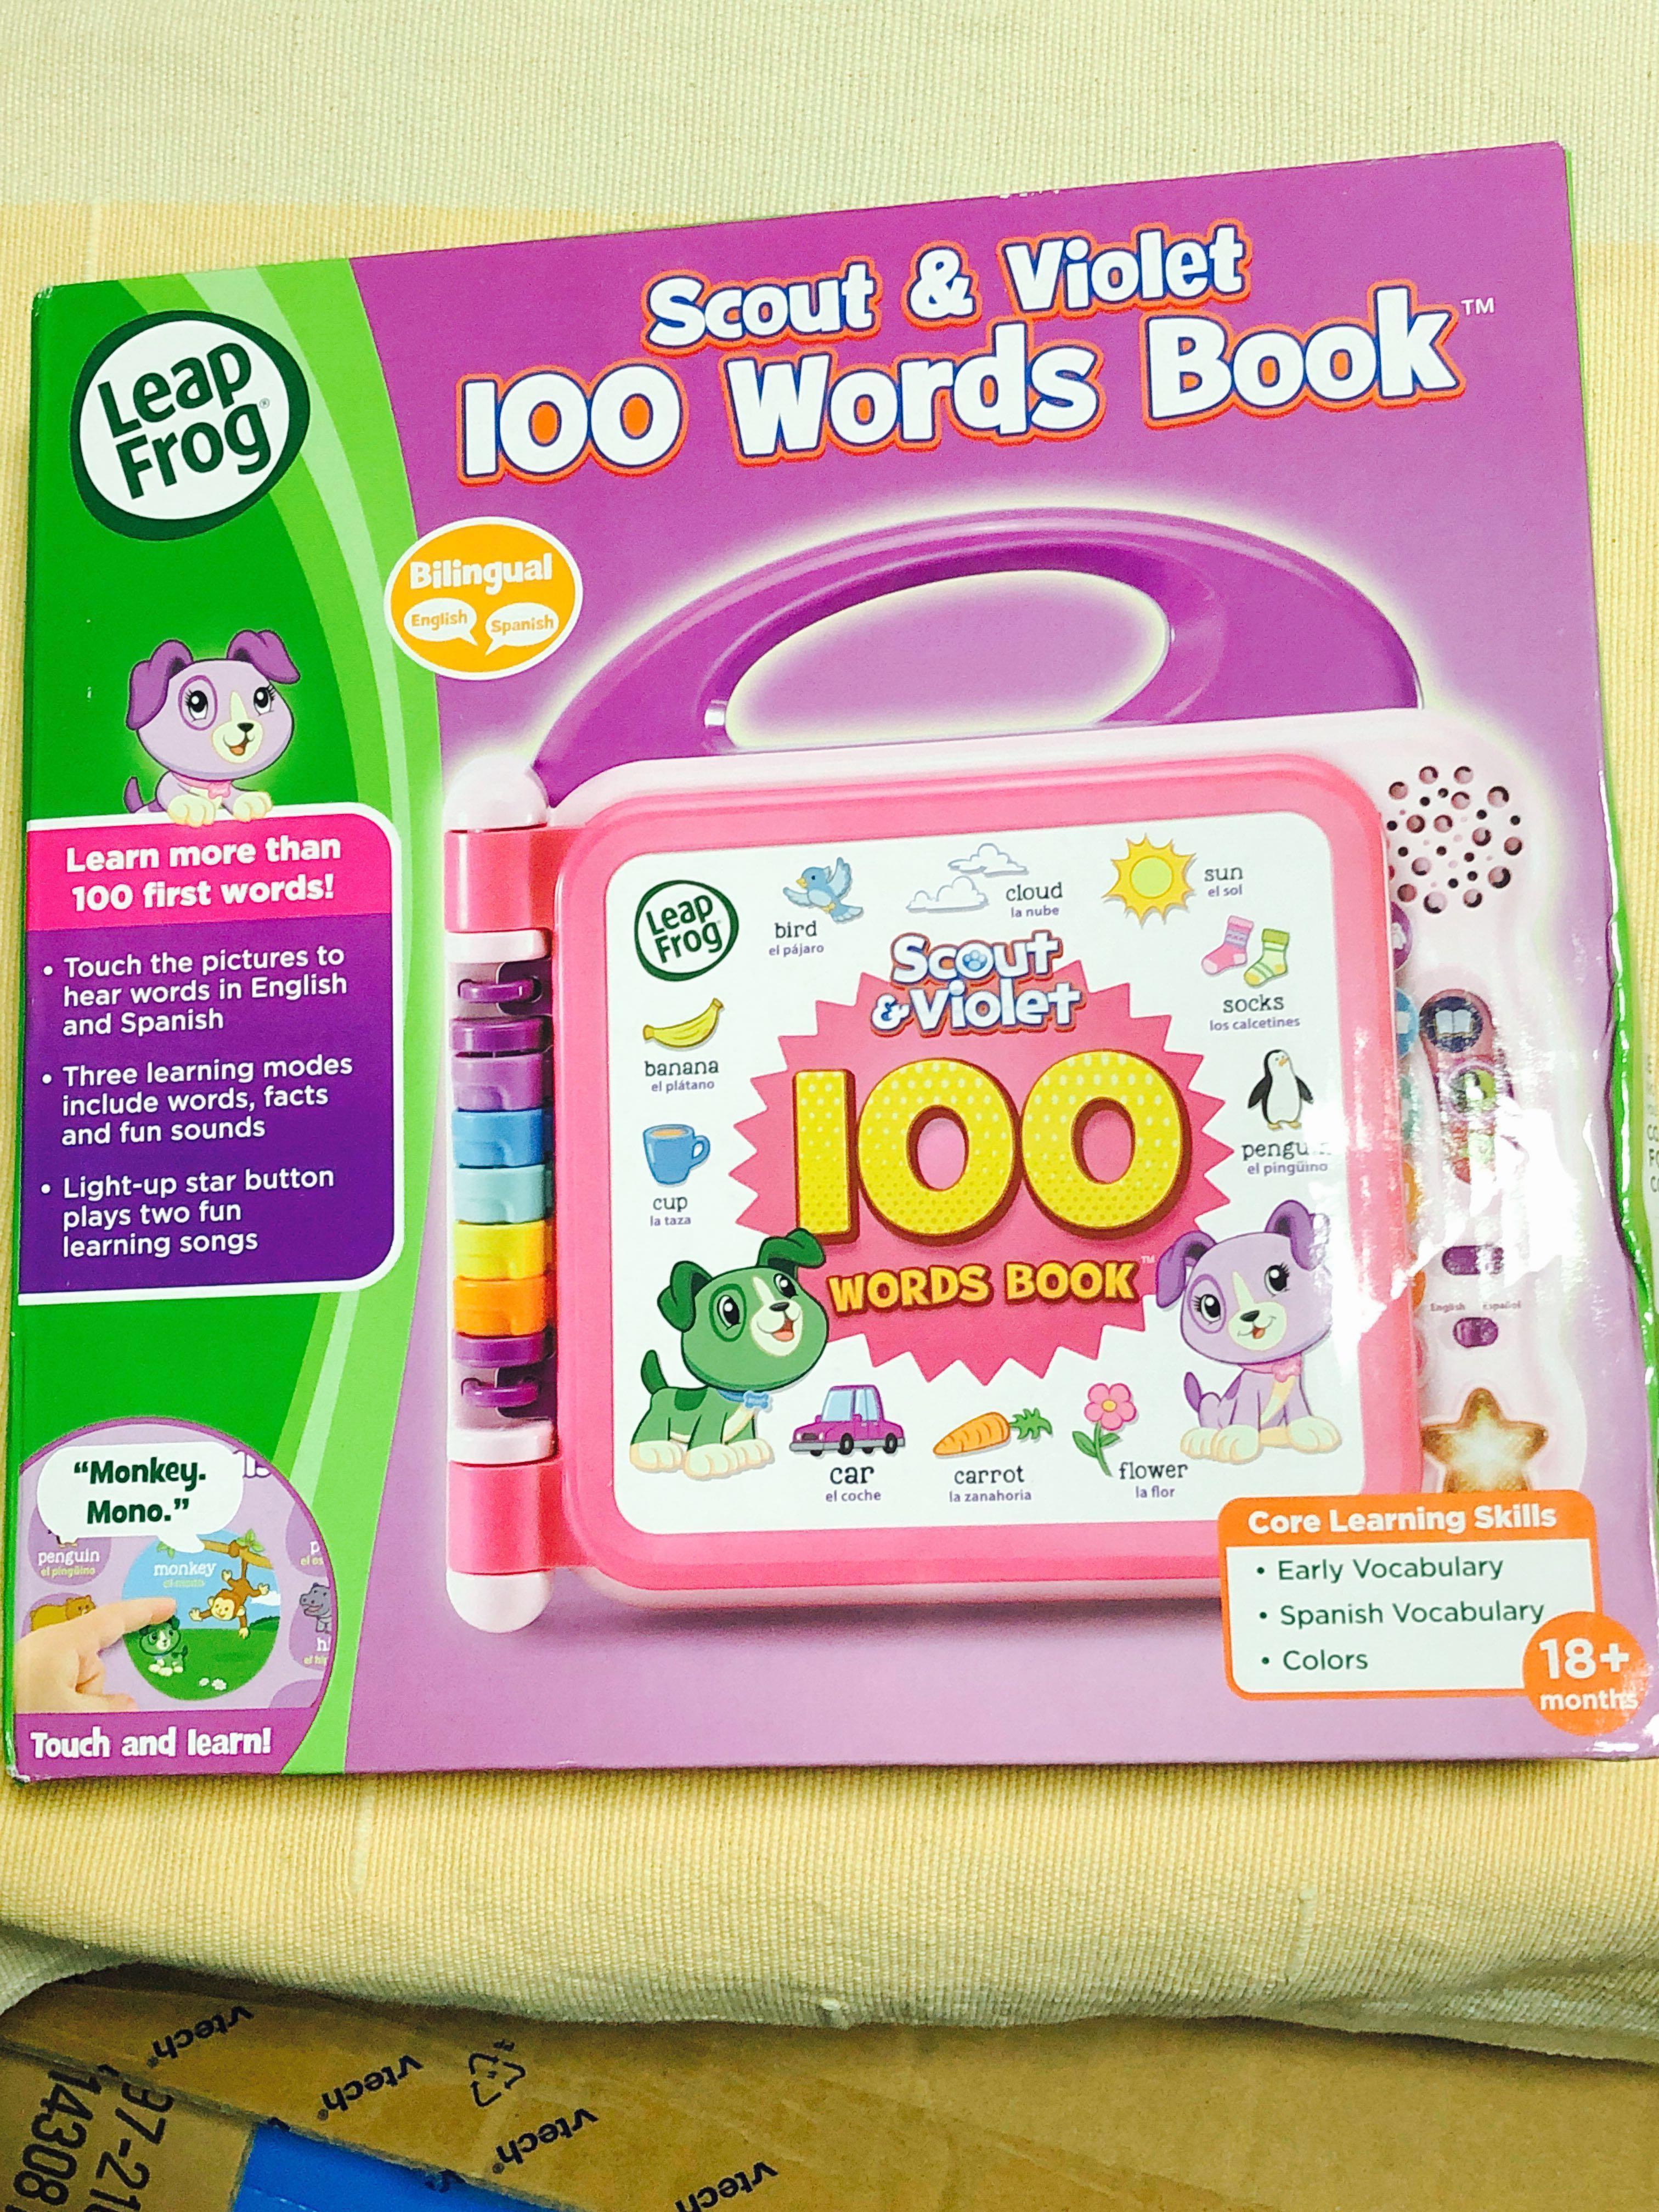 leapfrog scout and violet 100 words book